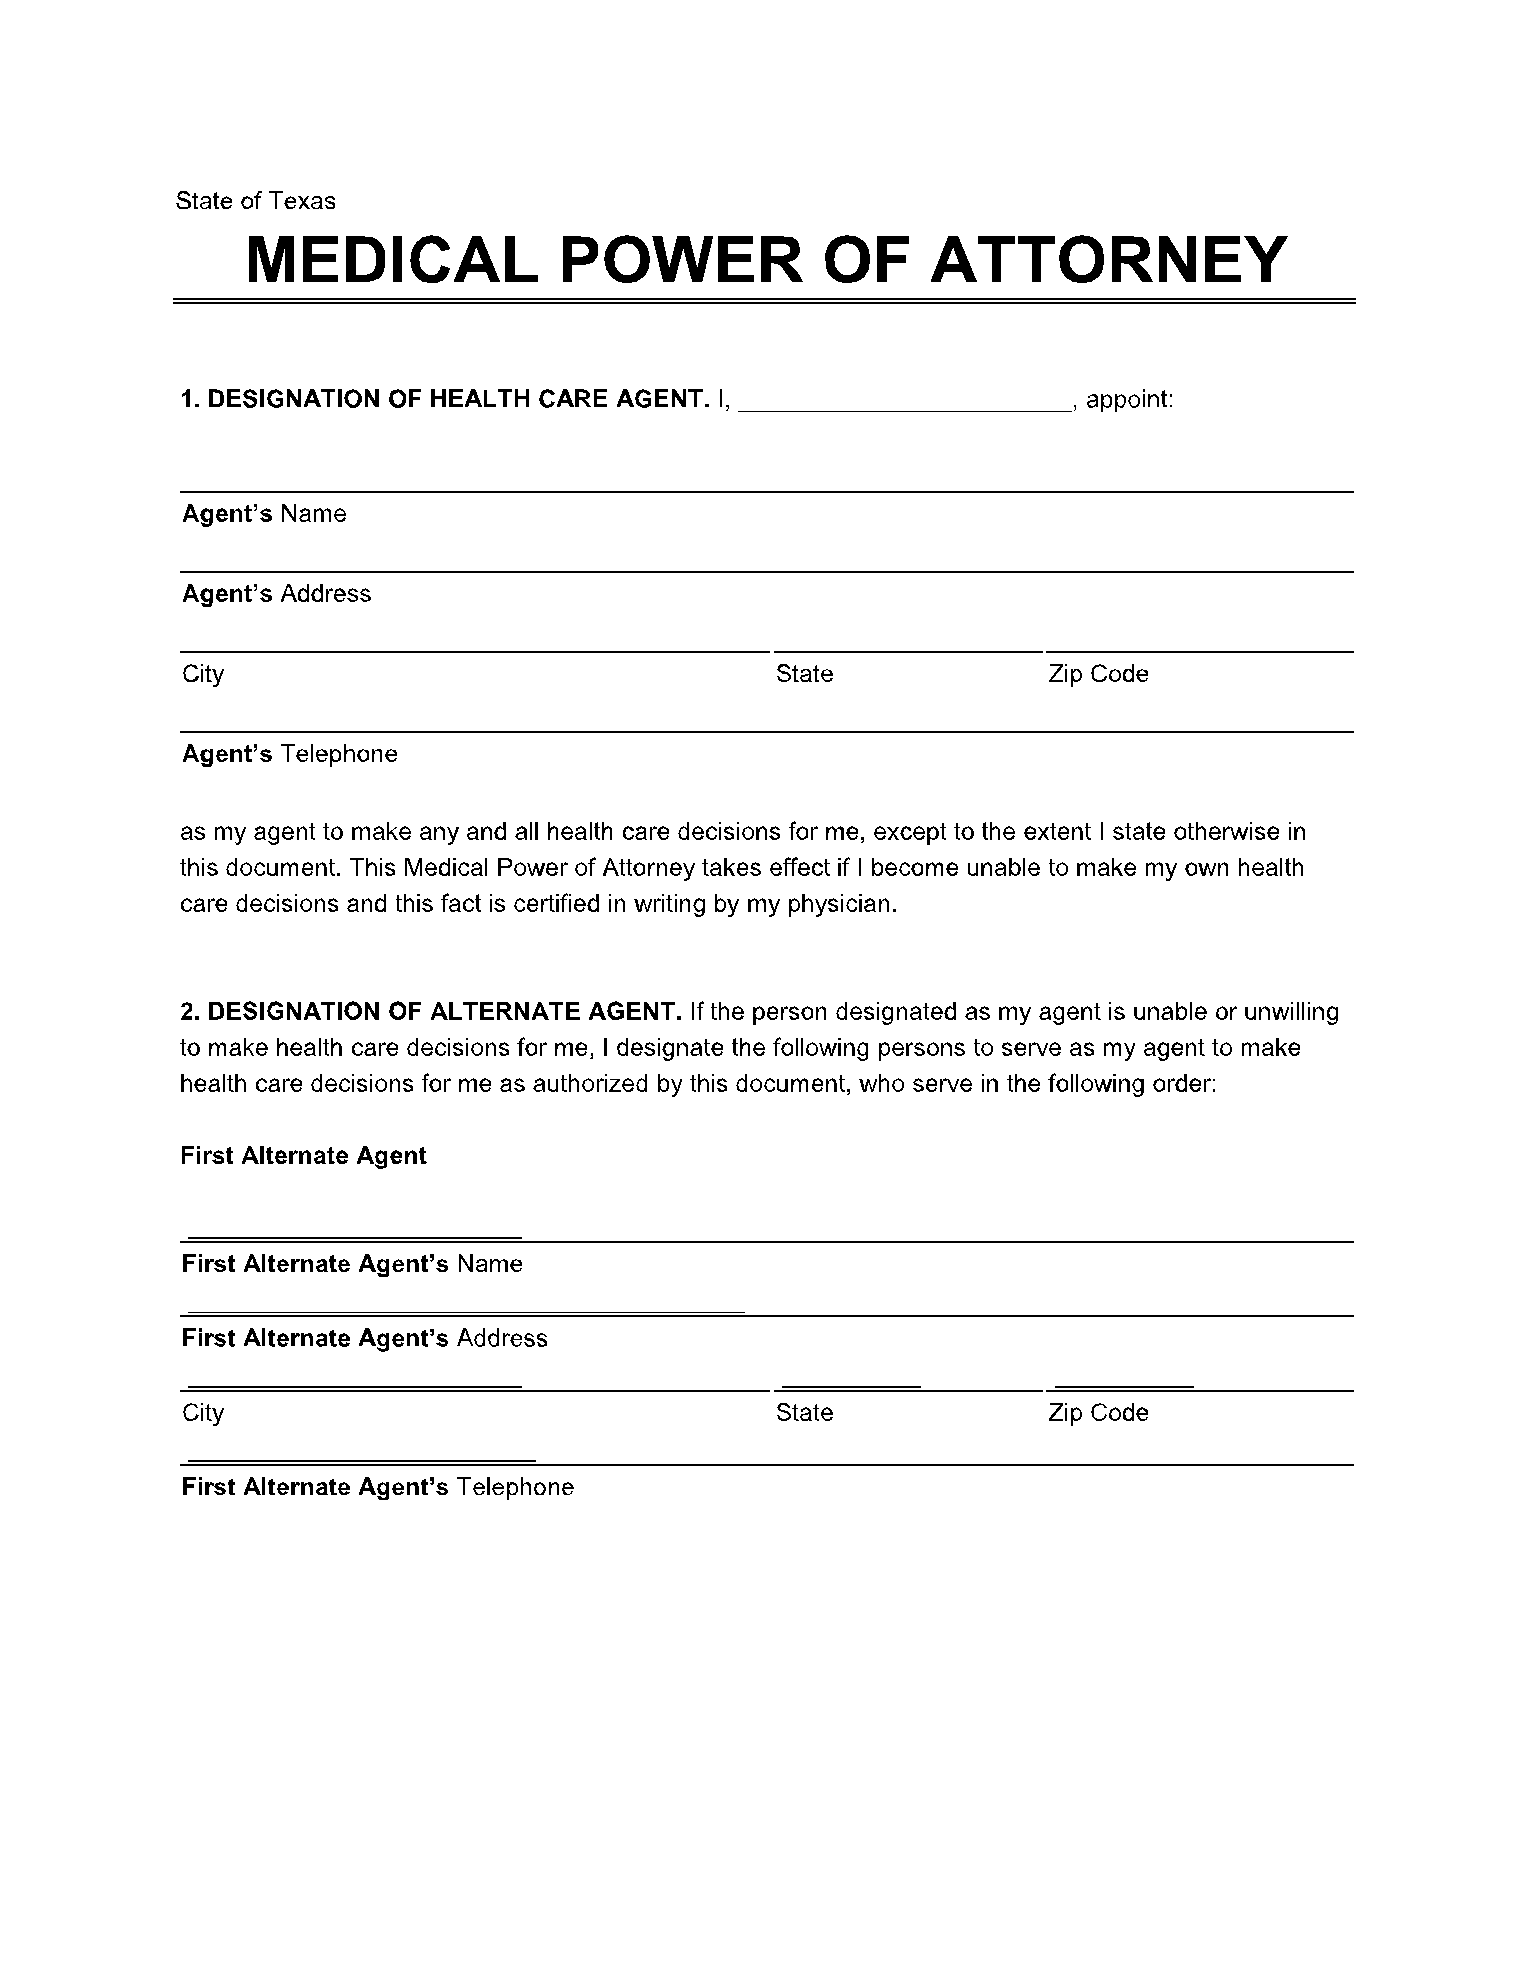 Medical Power of Attorney Texas